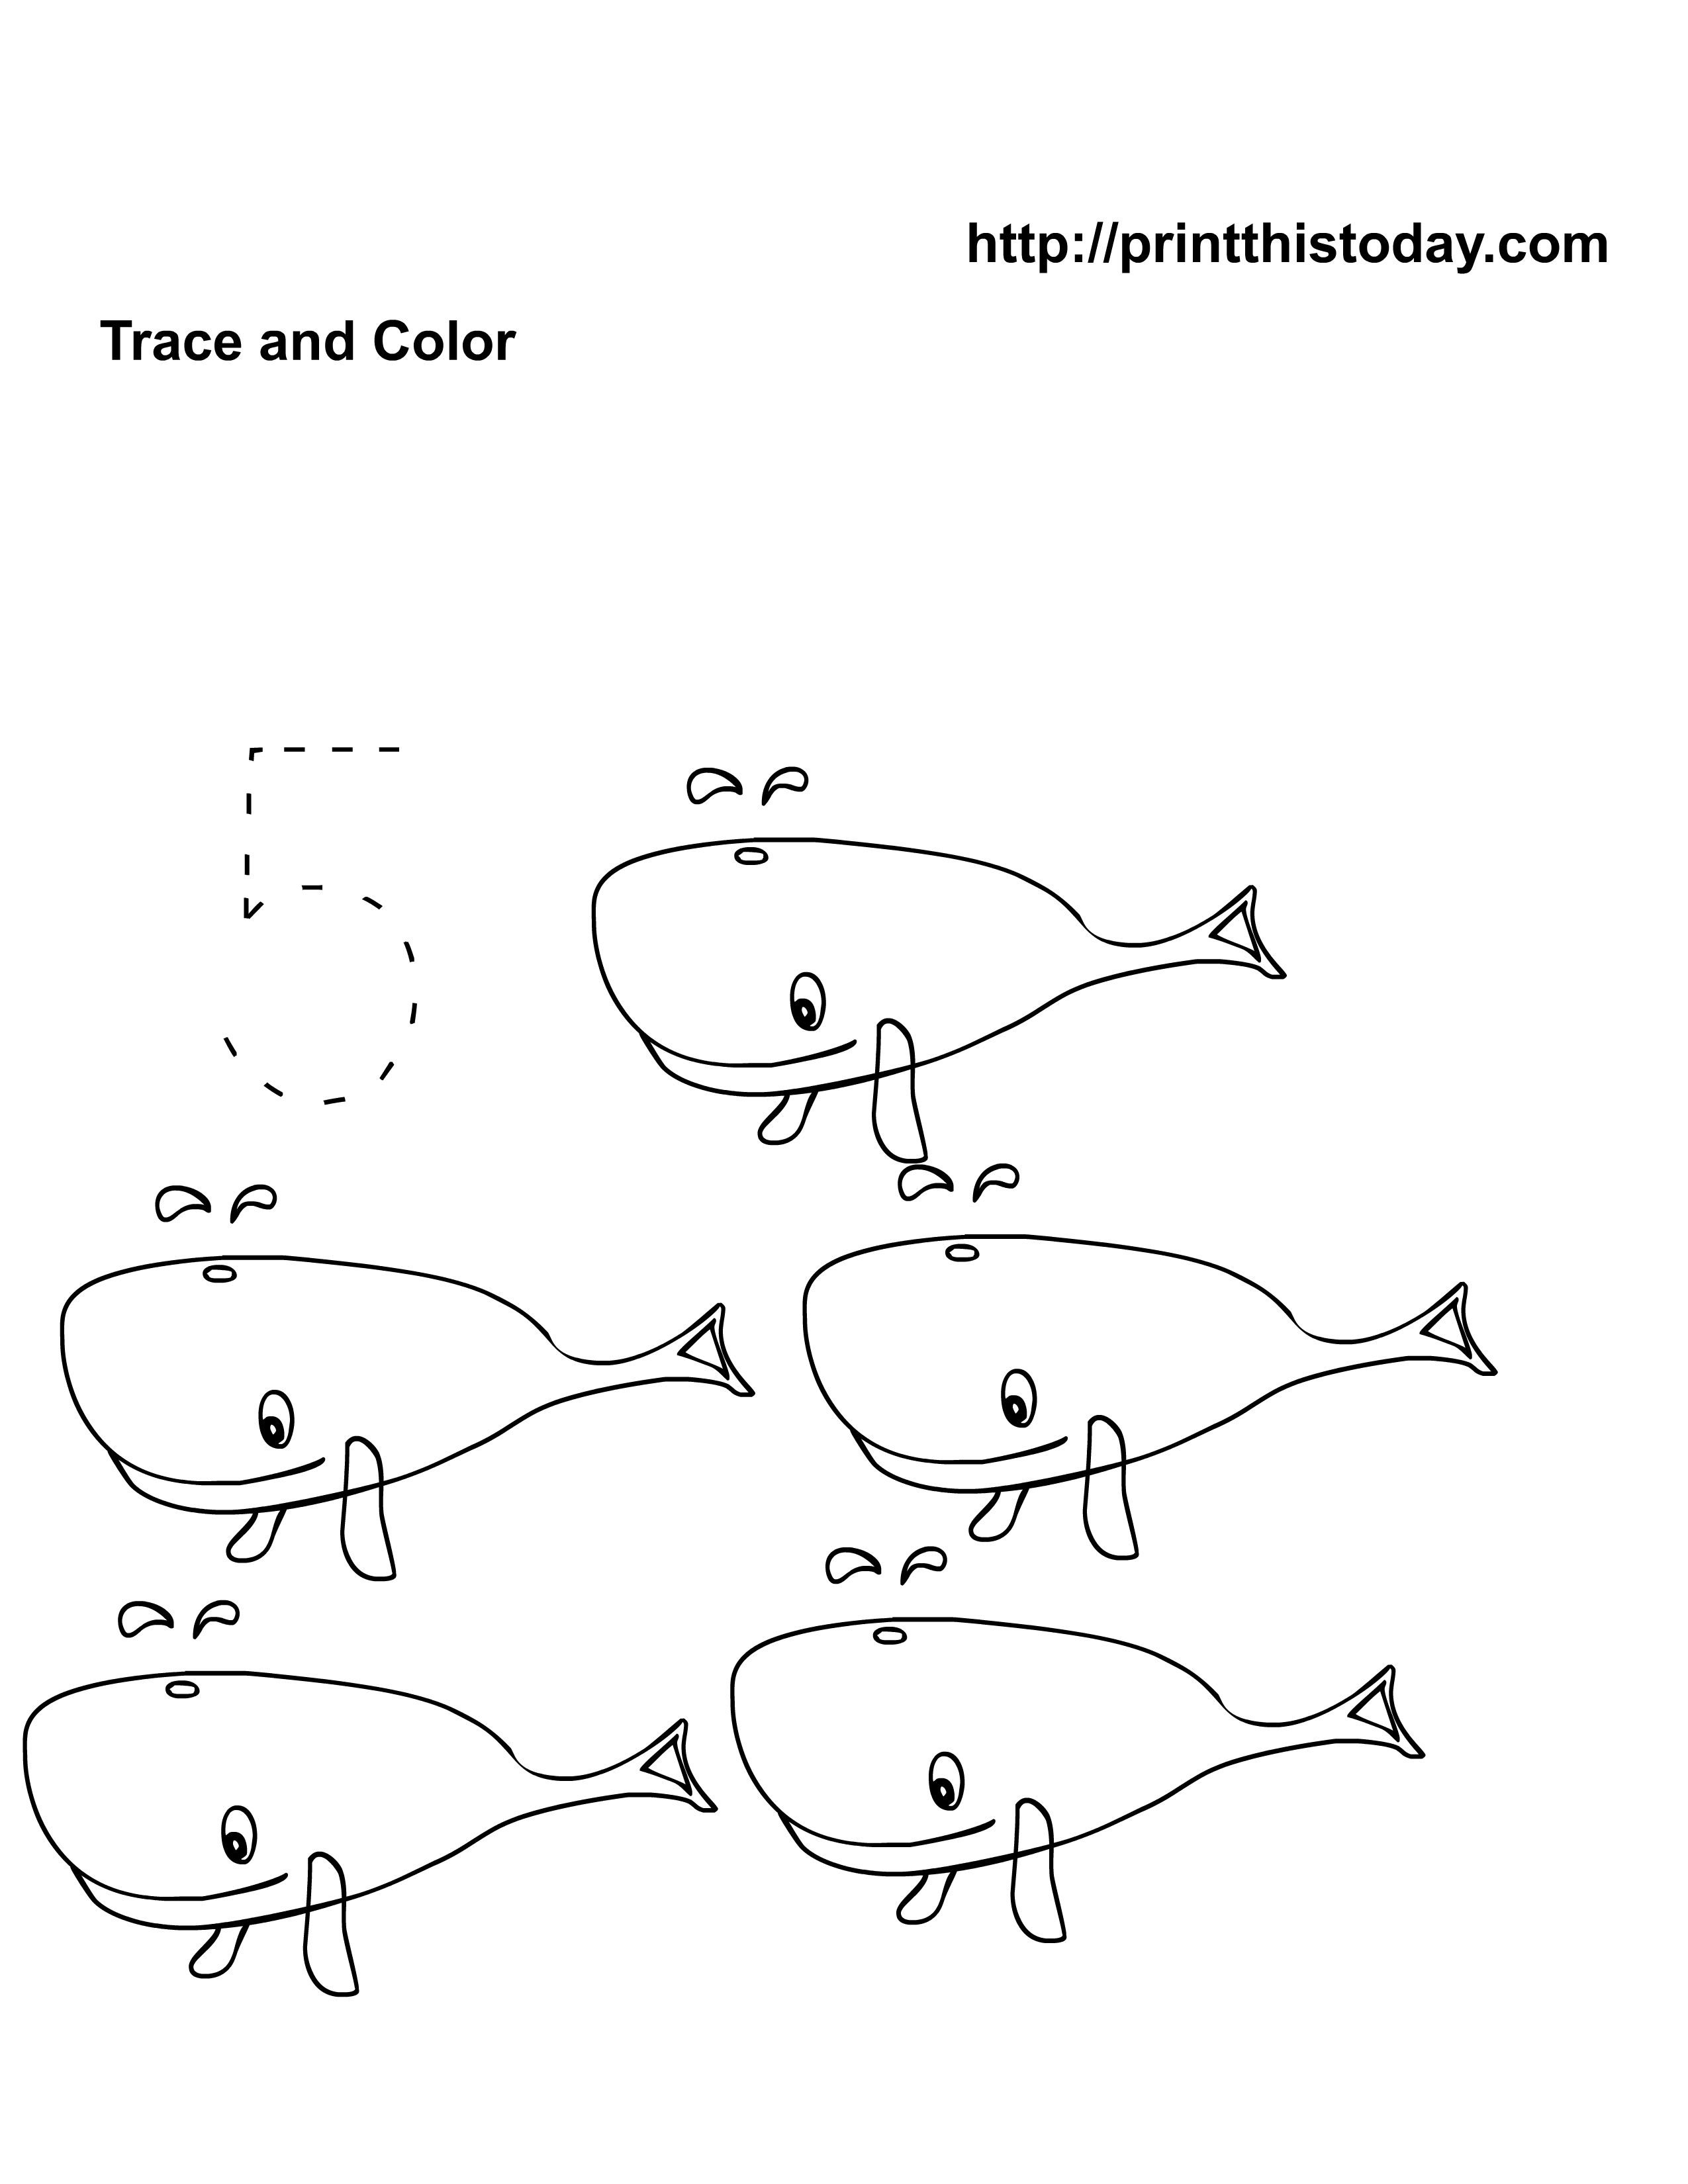 7-best-images-of-whales-art-free-printable-preschool-animal-coloring-pages-whale-preschool